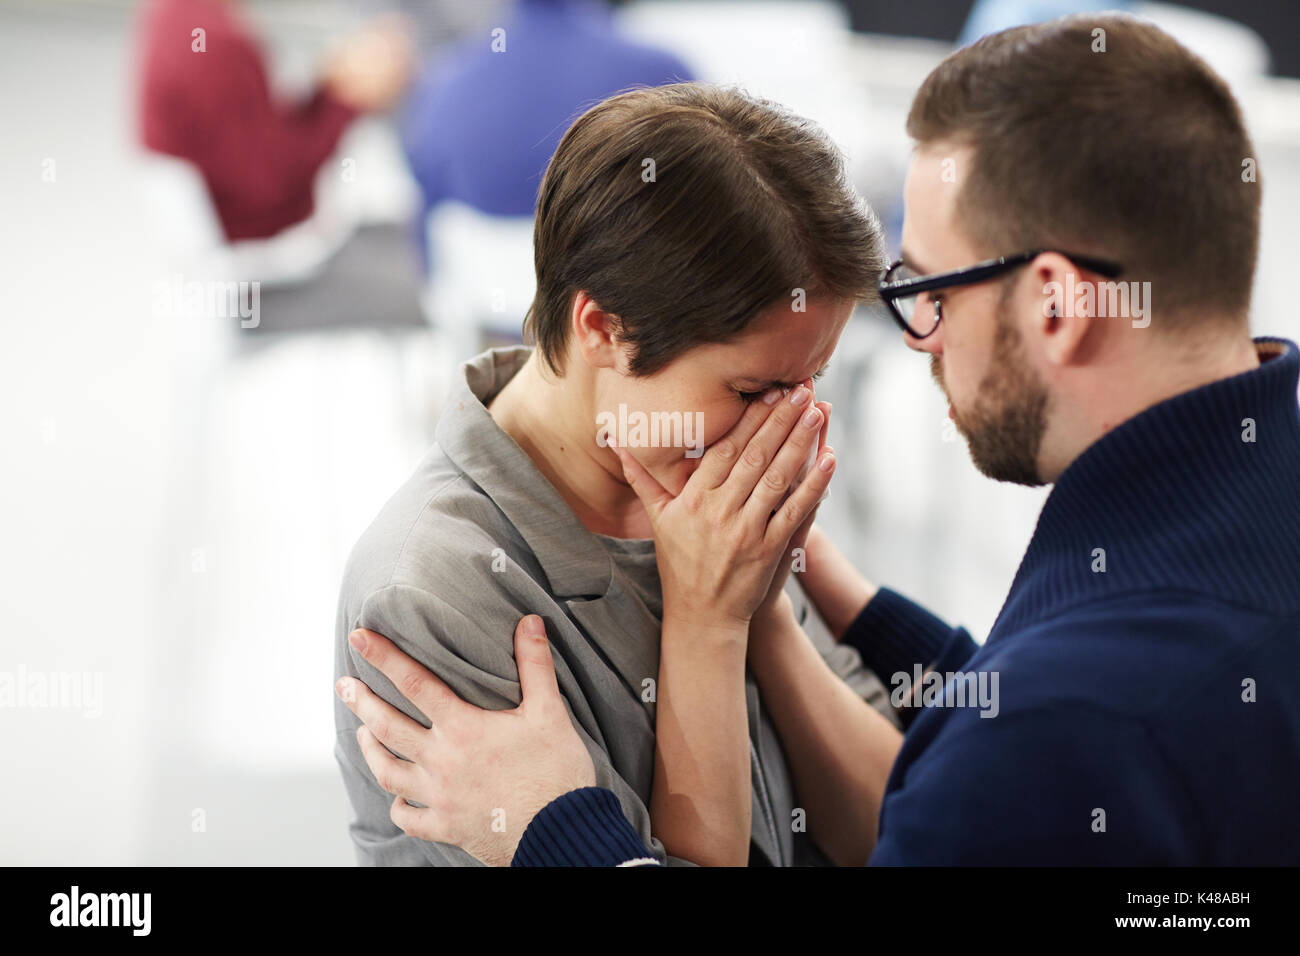 Psychological support Stock Photo